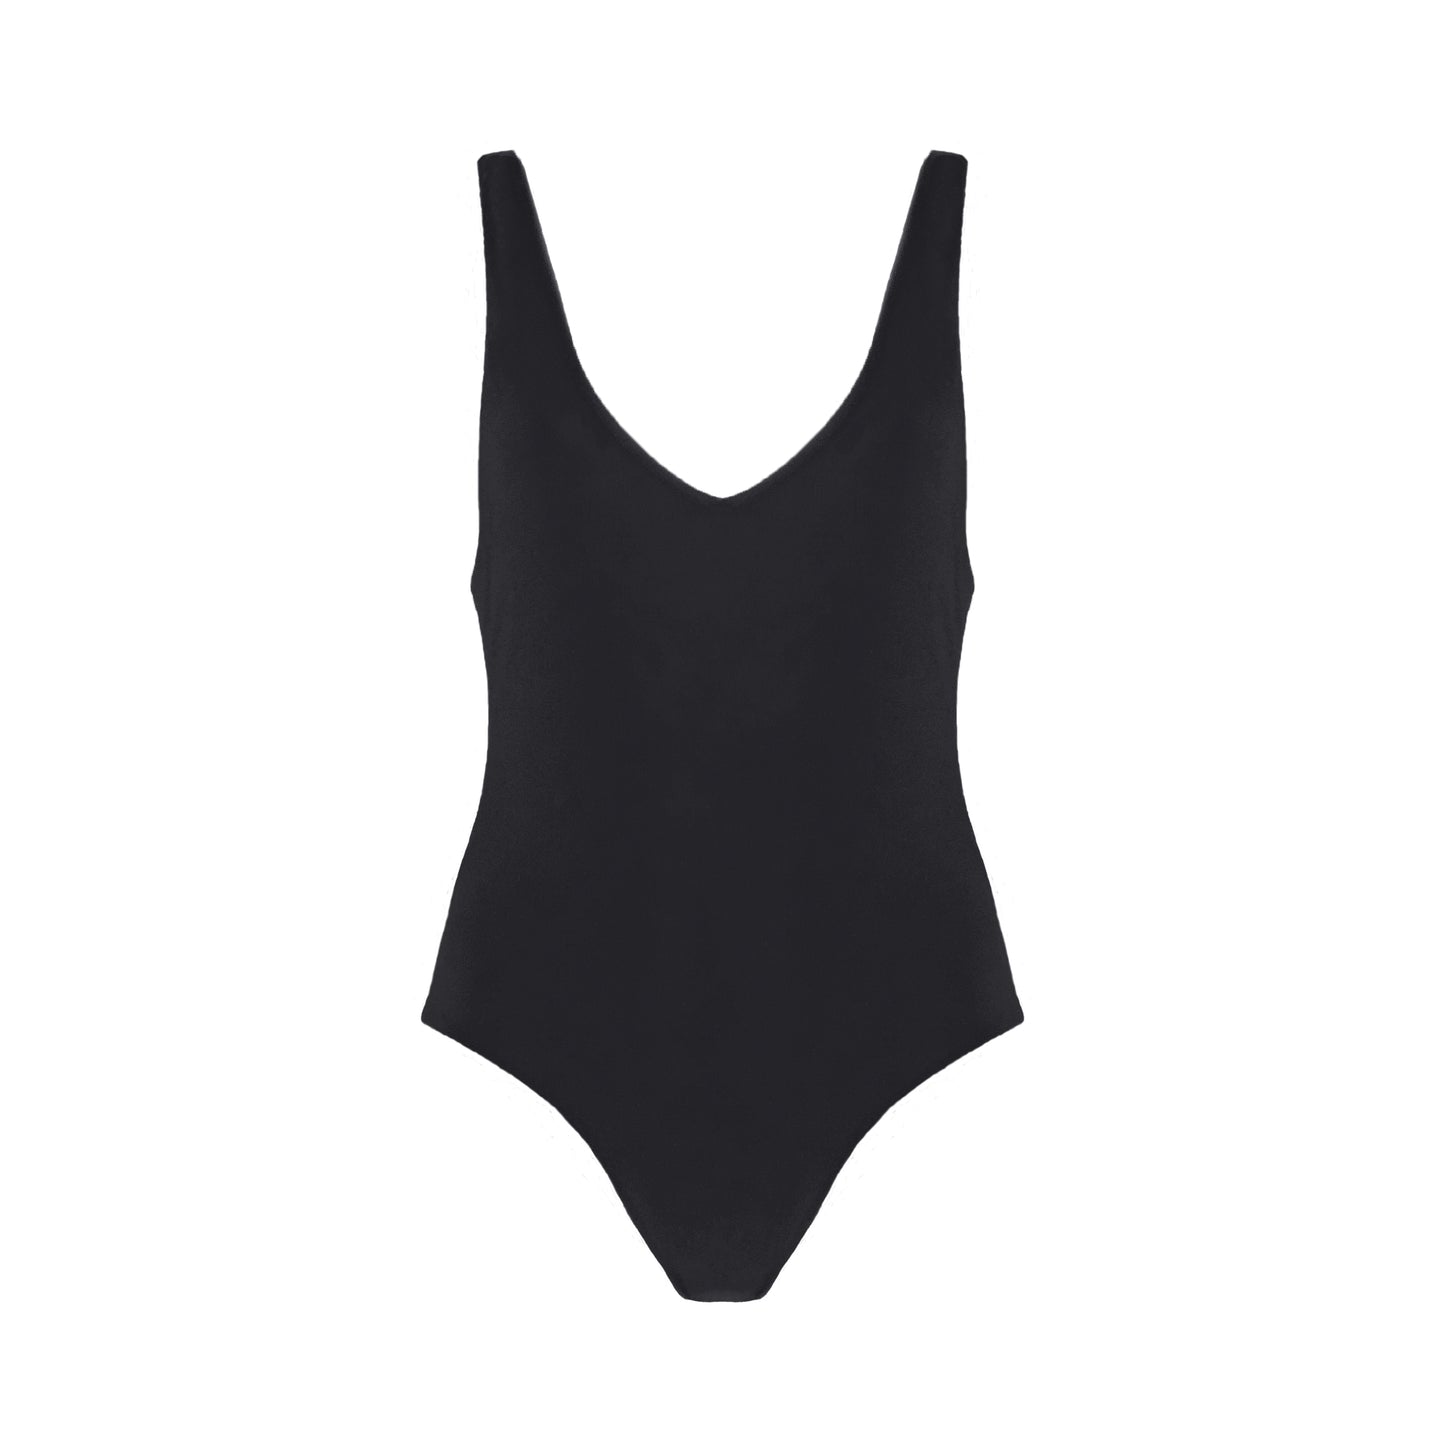 Charcoal grey plunging v-neck one piece swimsuit with low back, high cut legs, and cheeky bum coverage.